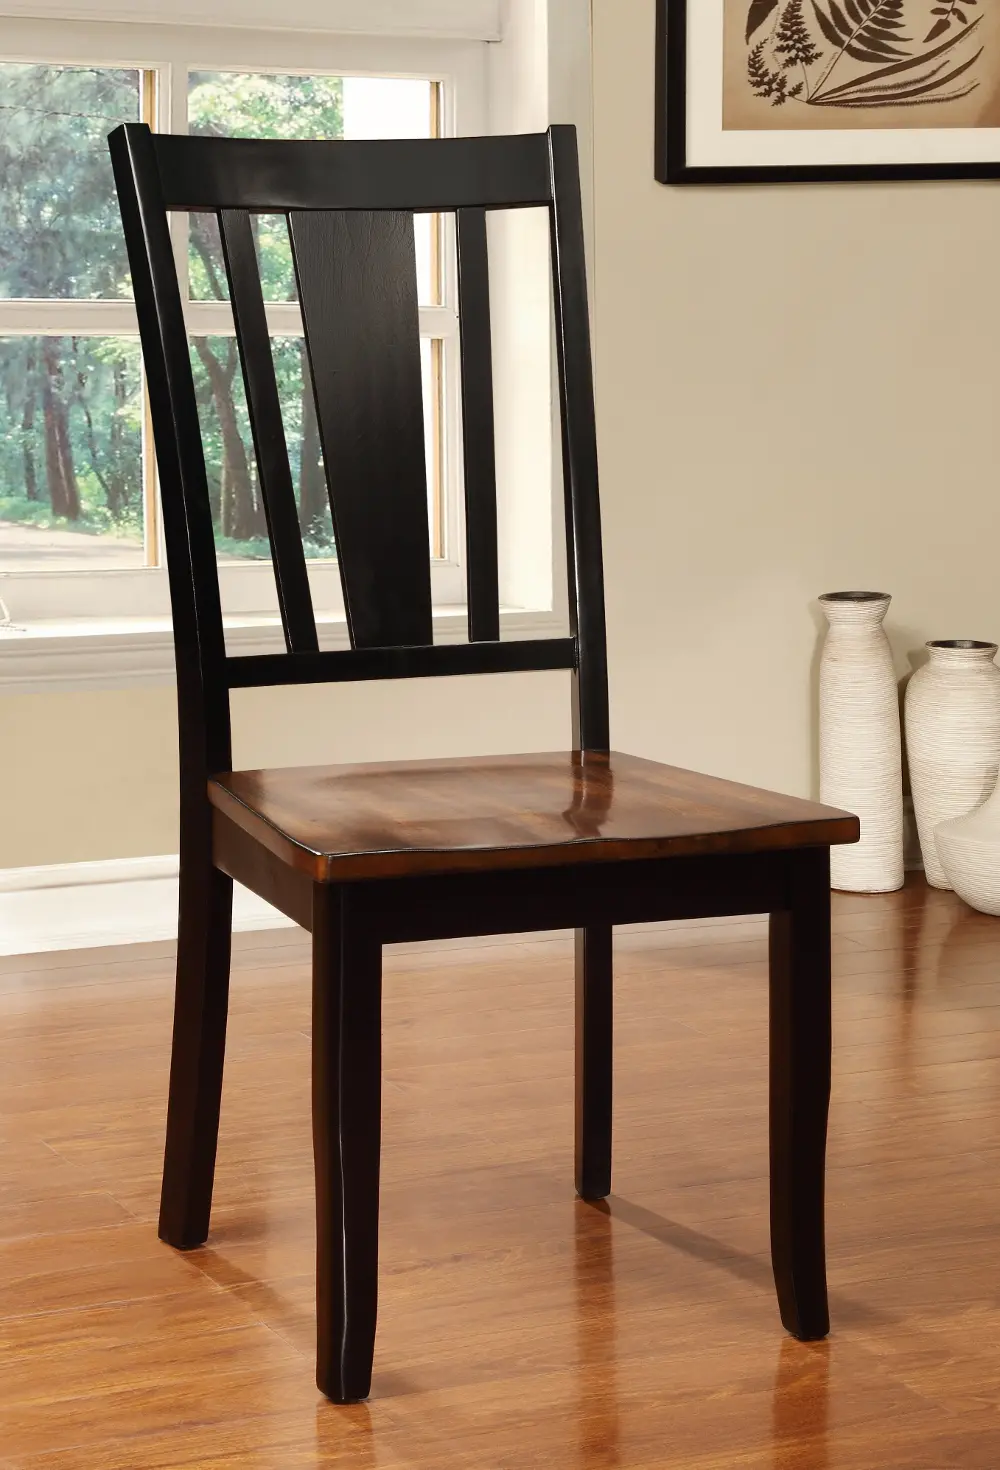 Black and Cherry Dining Room Chair - Dover Collection-1